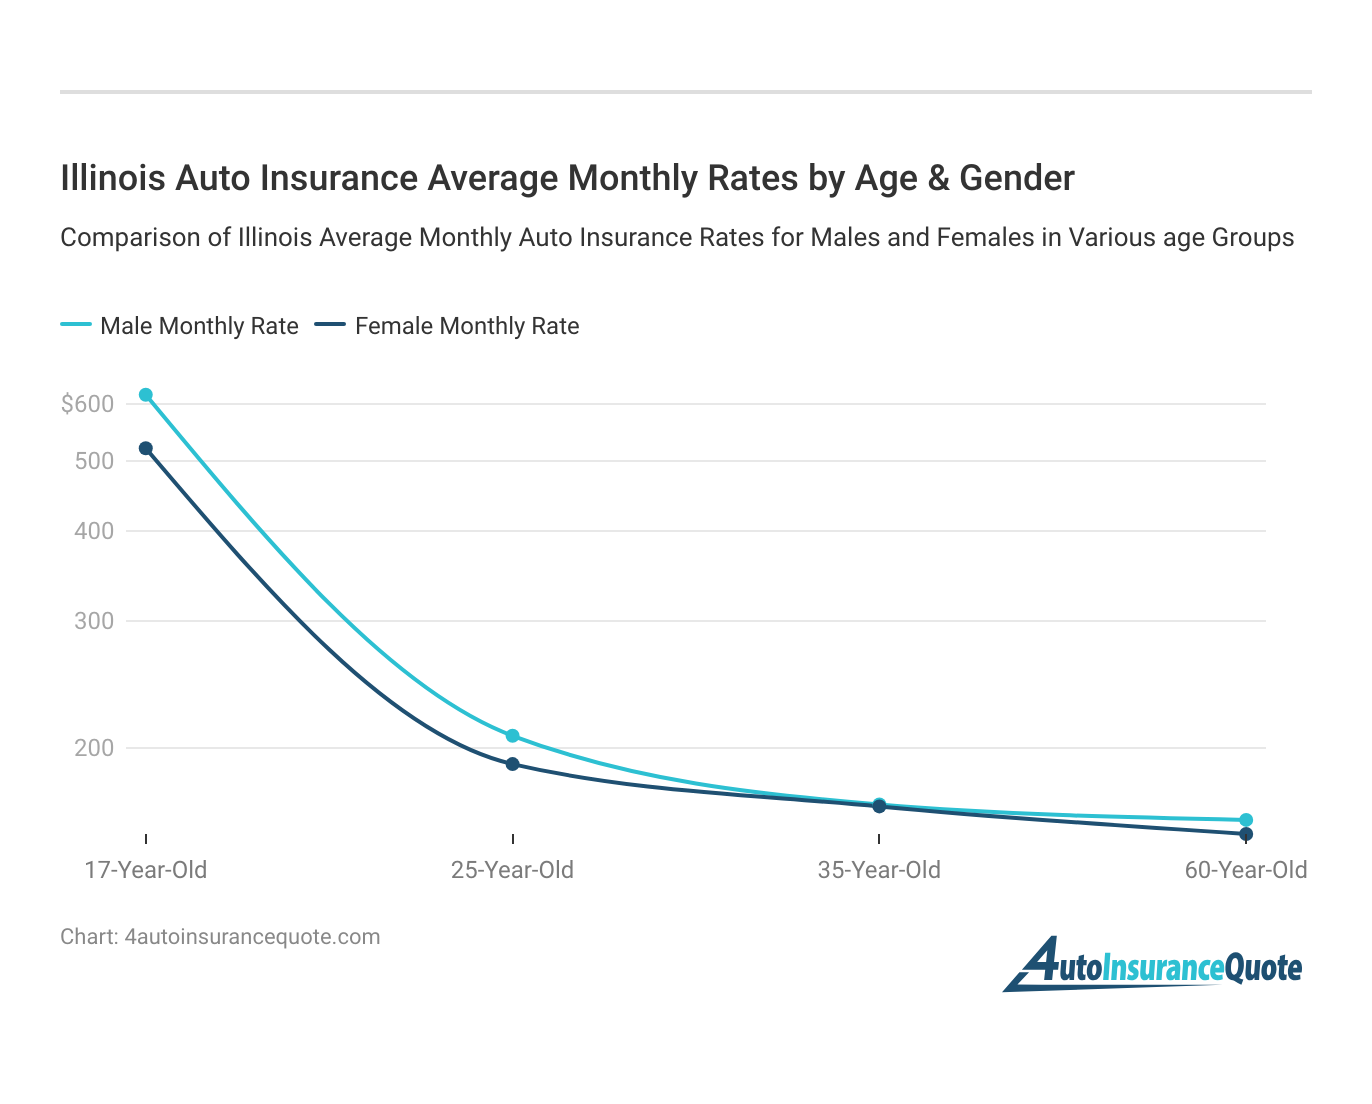 <h3>Illinois Auto Insurance Average Monthly Rates by Age & Gender</h3>